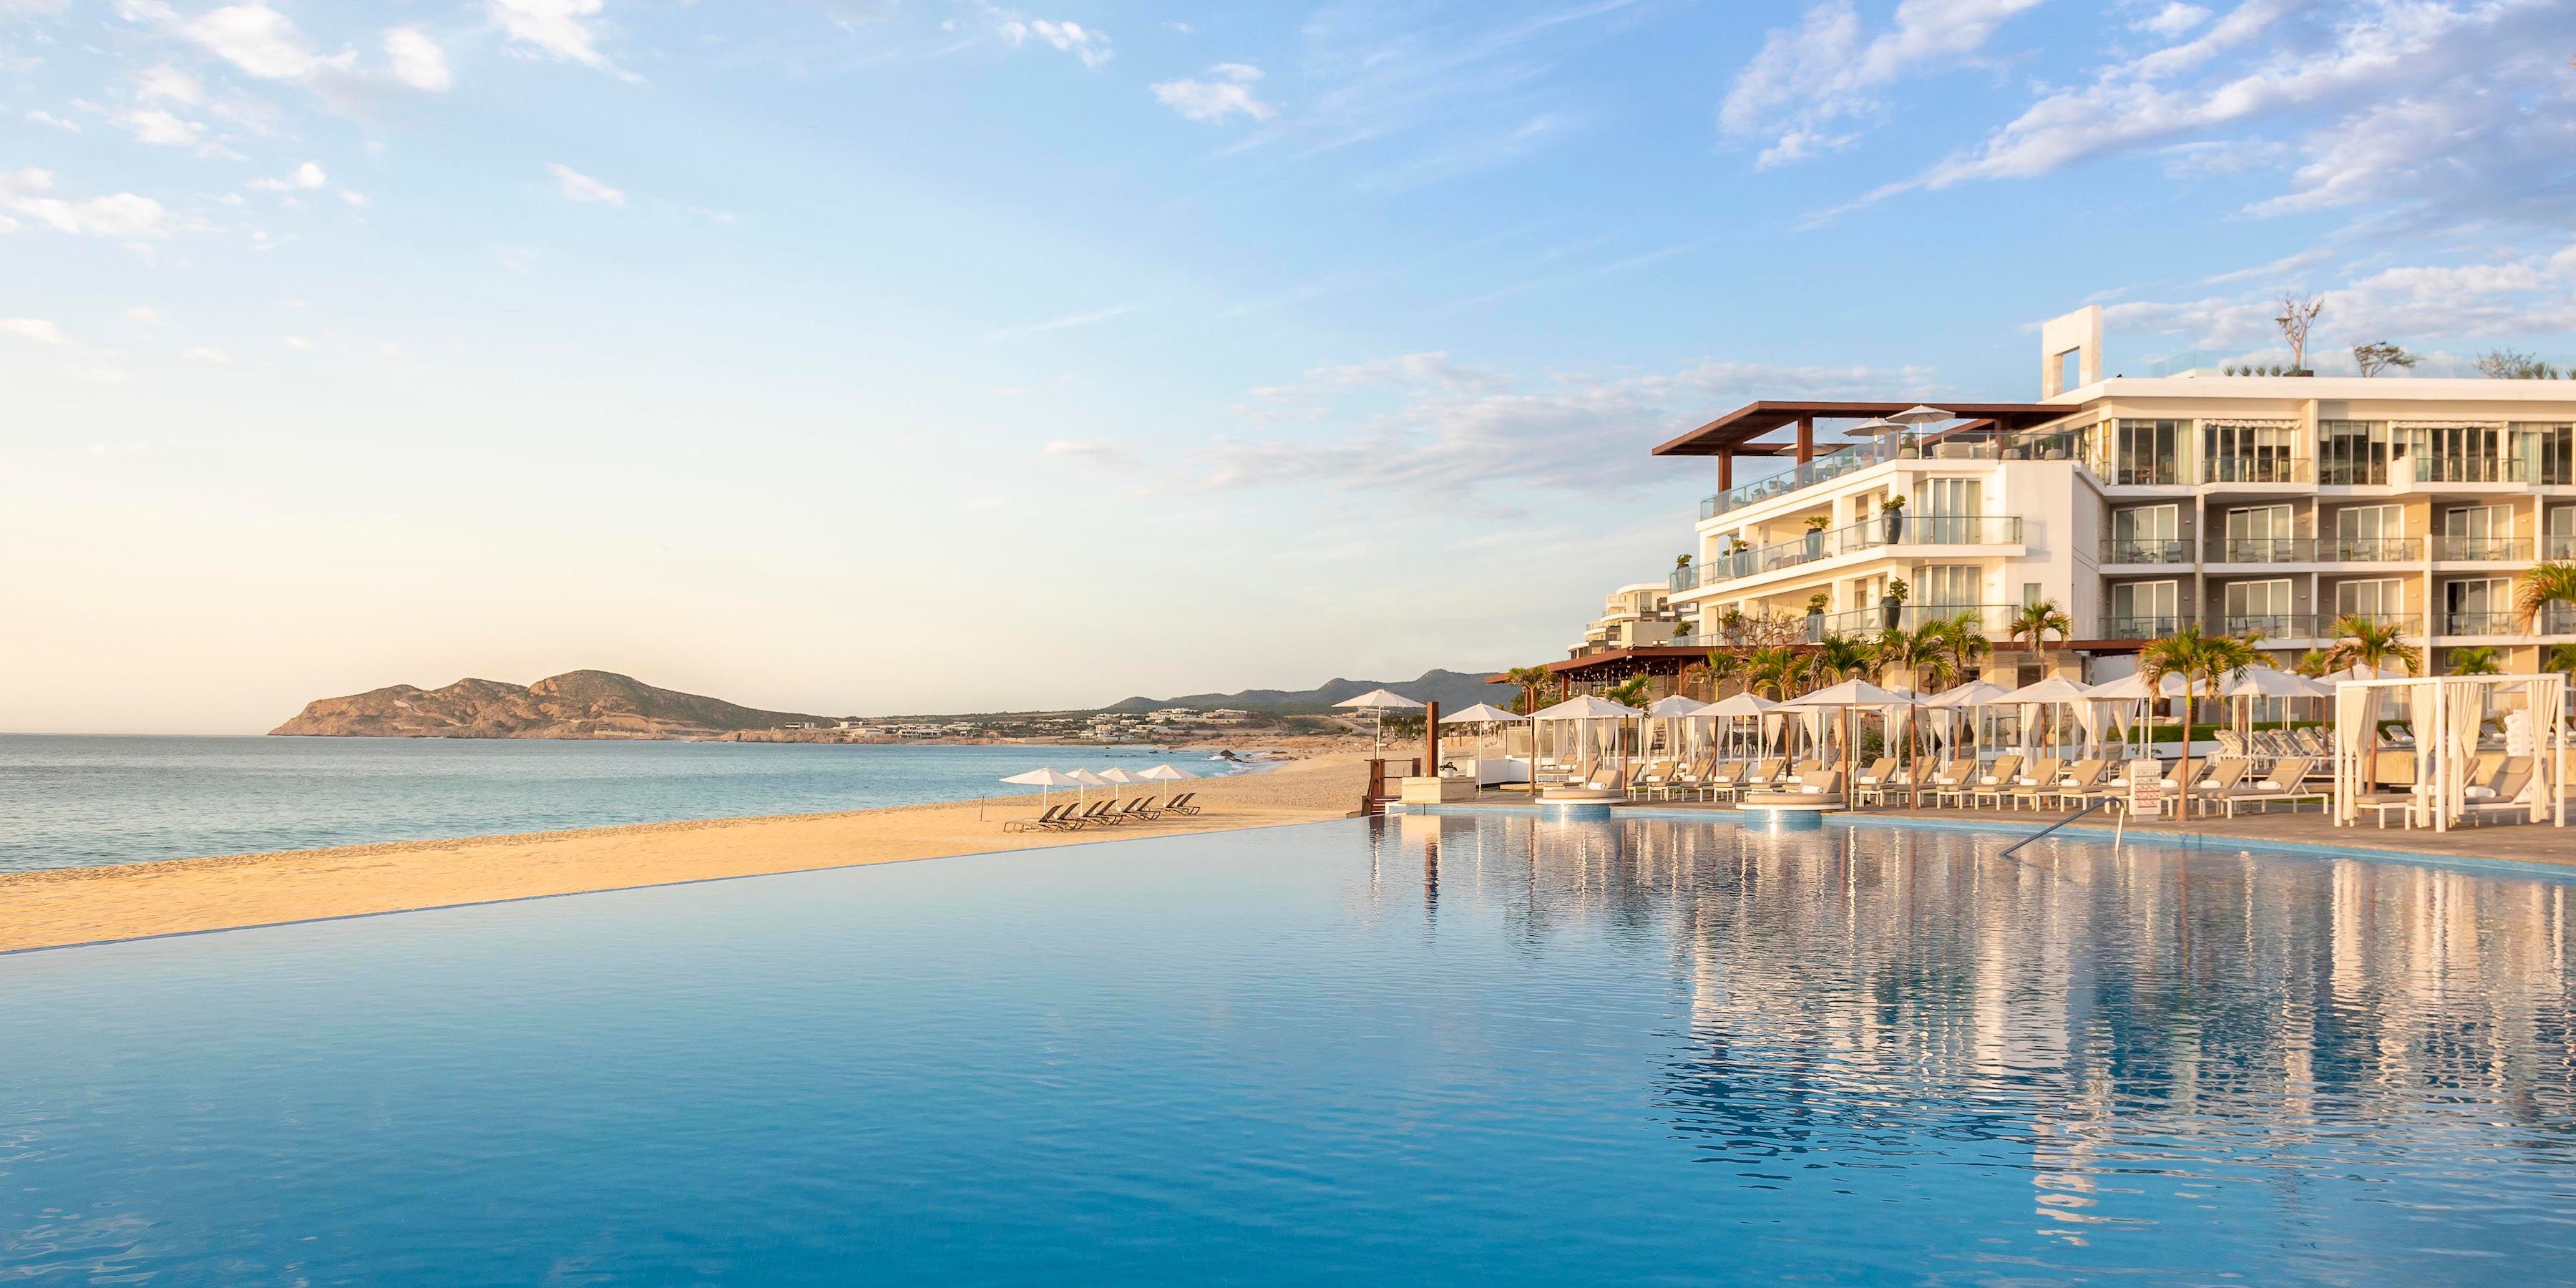 Relax in the resort's infinity pool